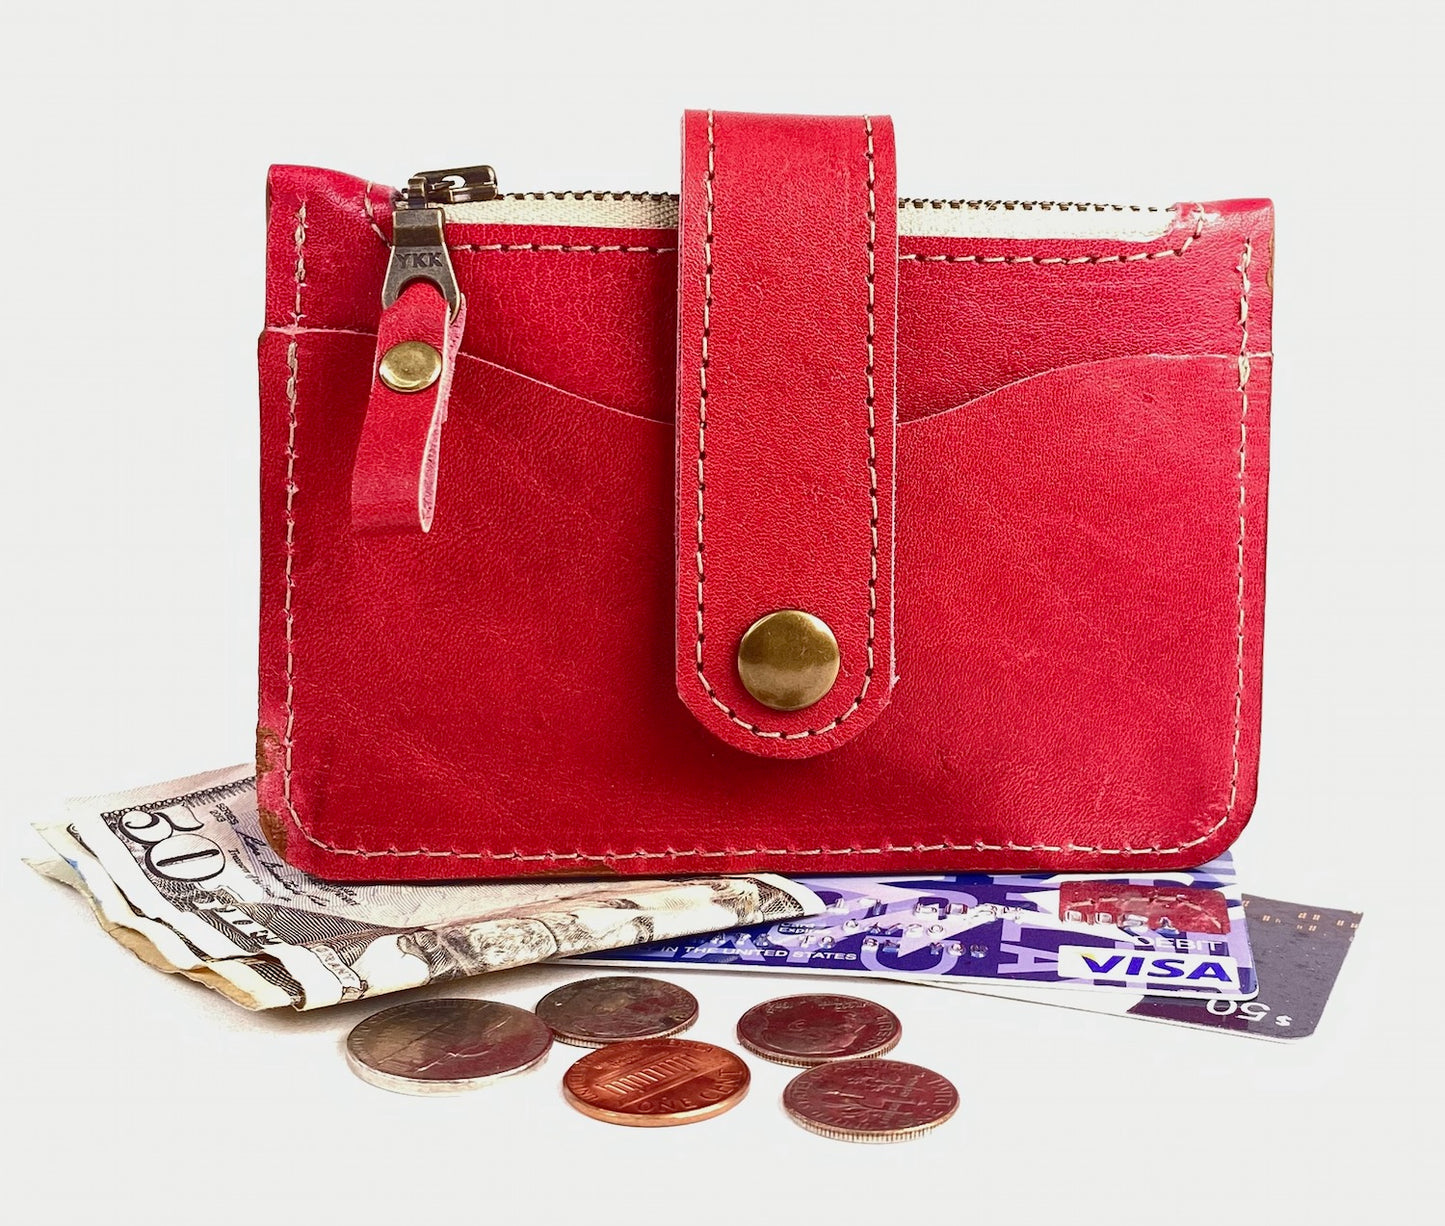 Leather wallet in red for cards and cash in minimalist design handcrafted in USA.